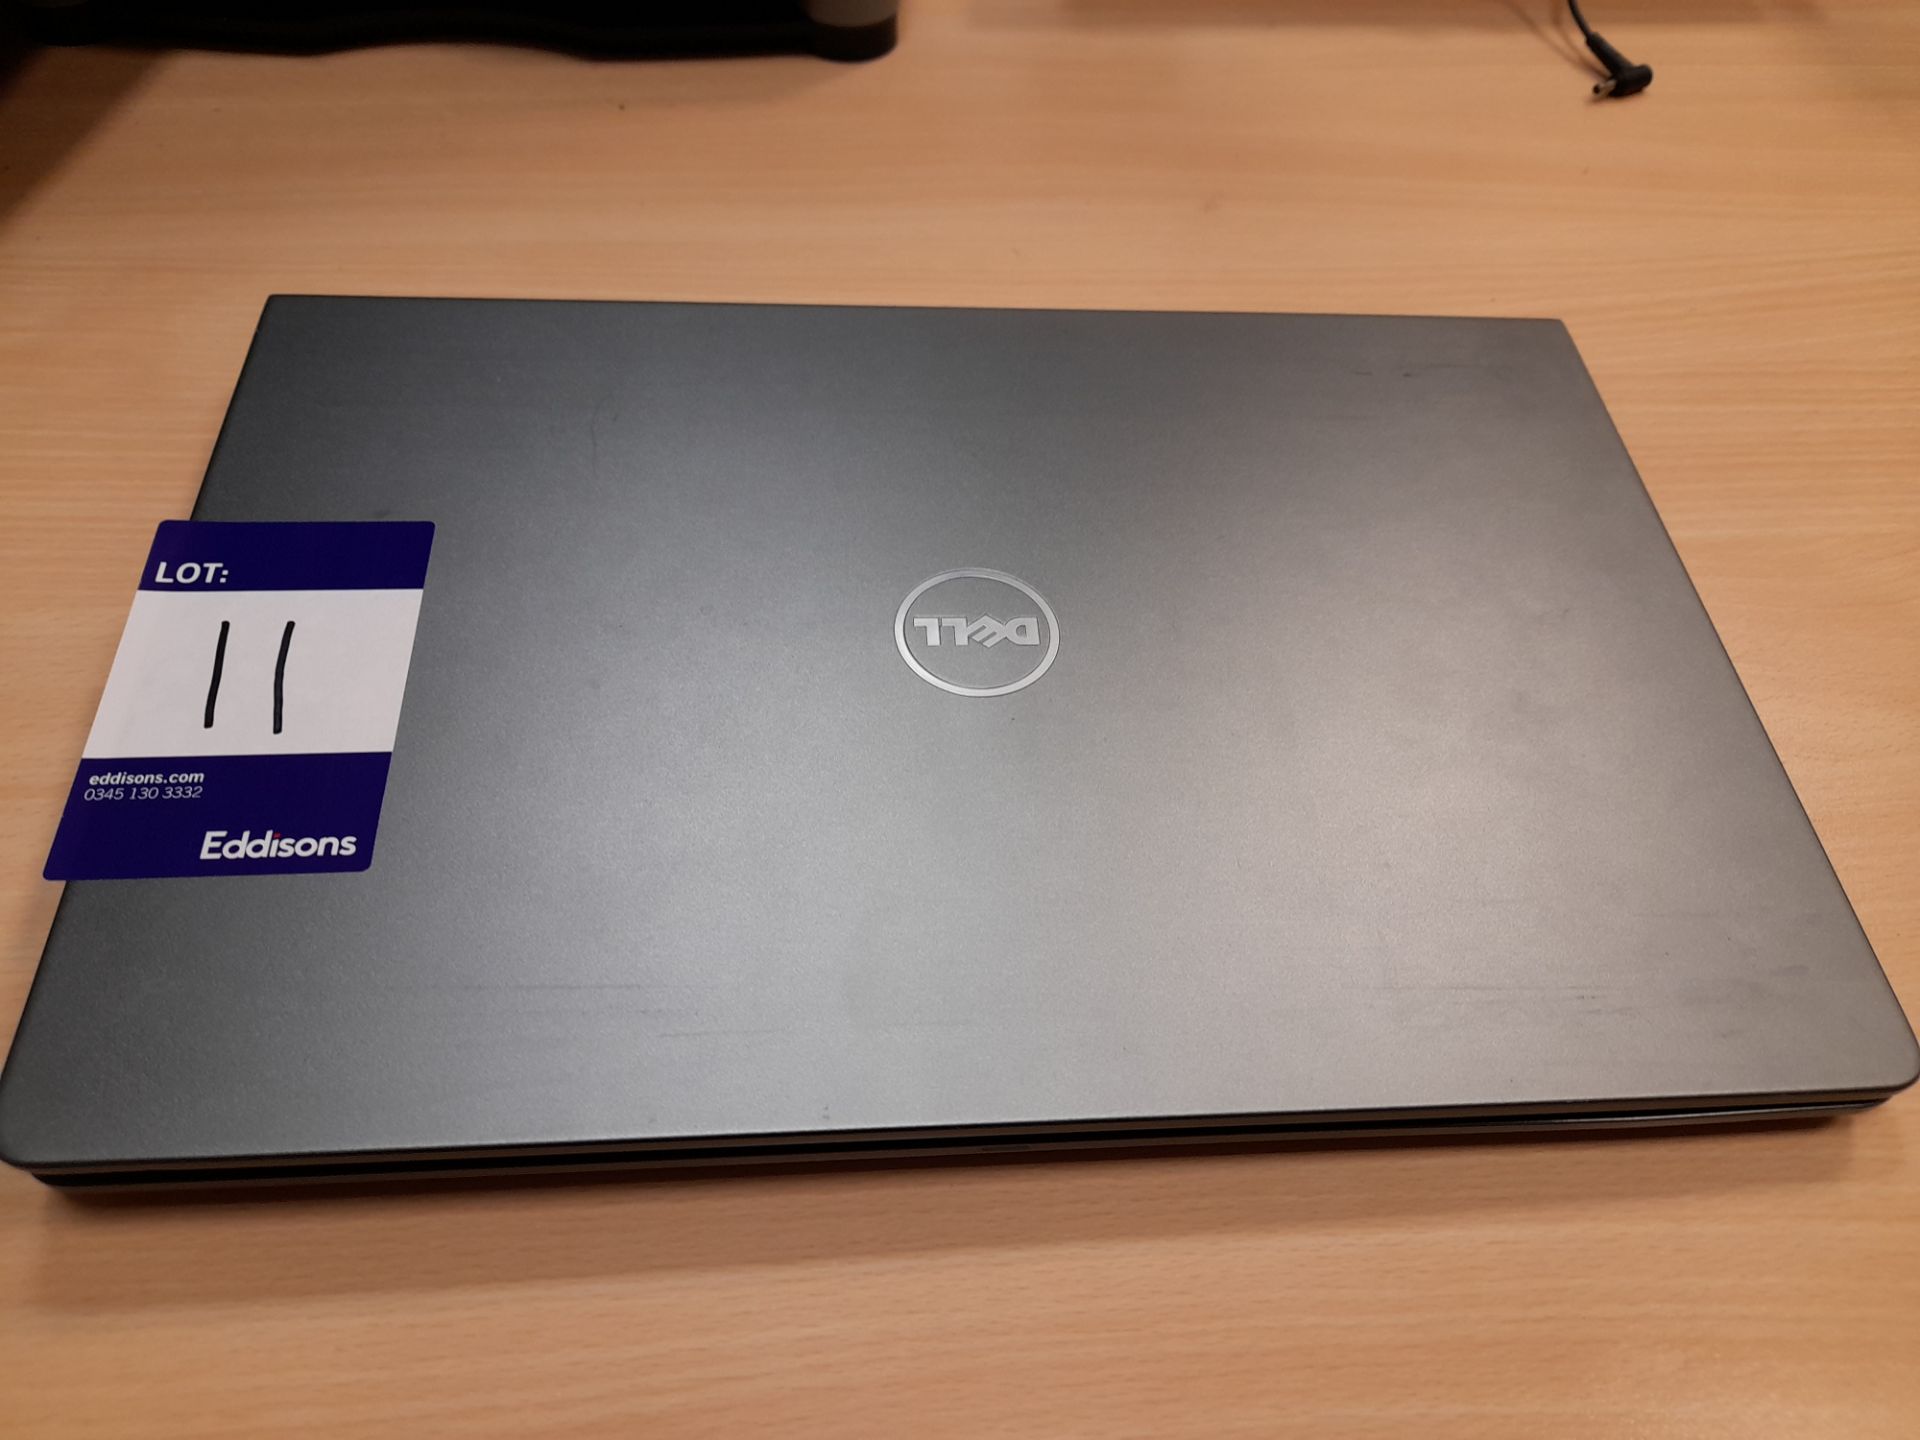 Dell Vostro P62F laptop, with Intel Core i5 7th Gen, Serial Number: 6BMGKP2, Year: 2018 Damage to